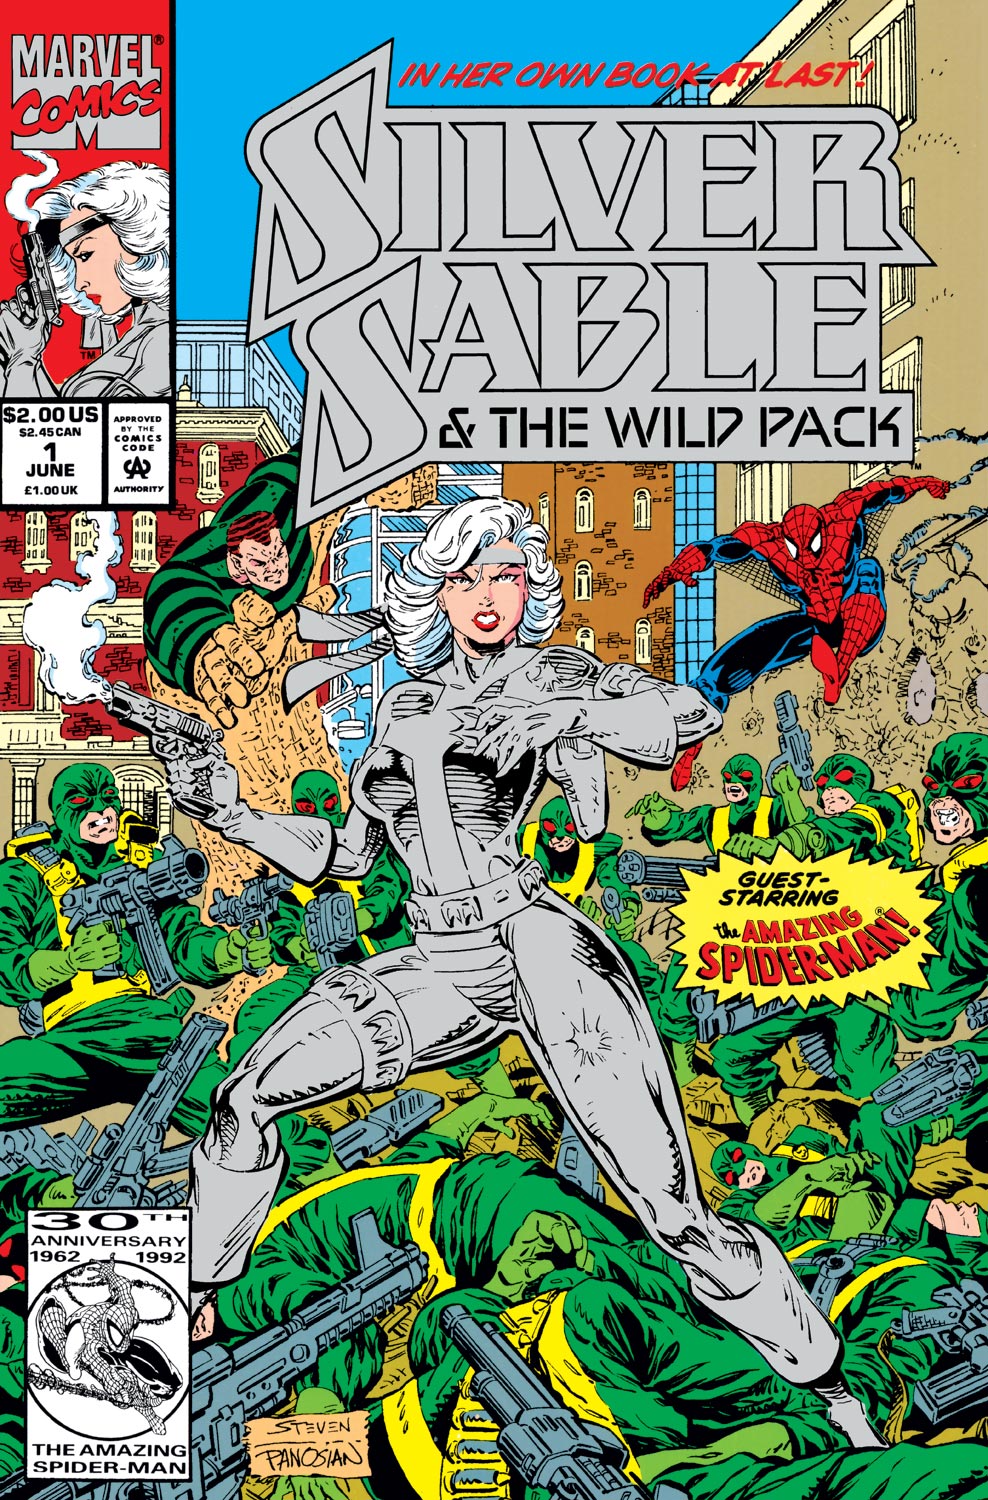 Silver sable and the wild pack